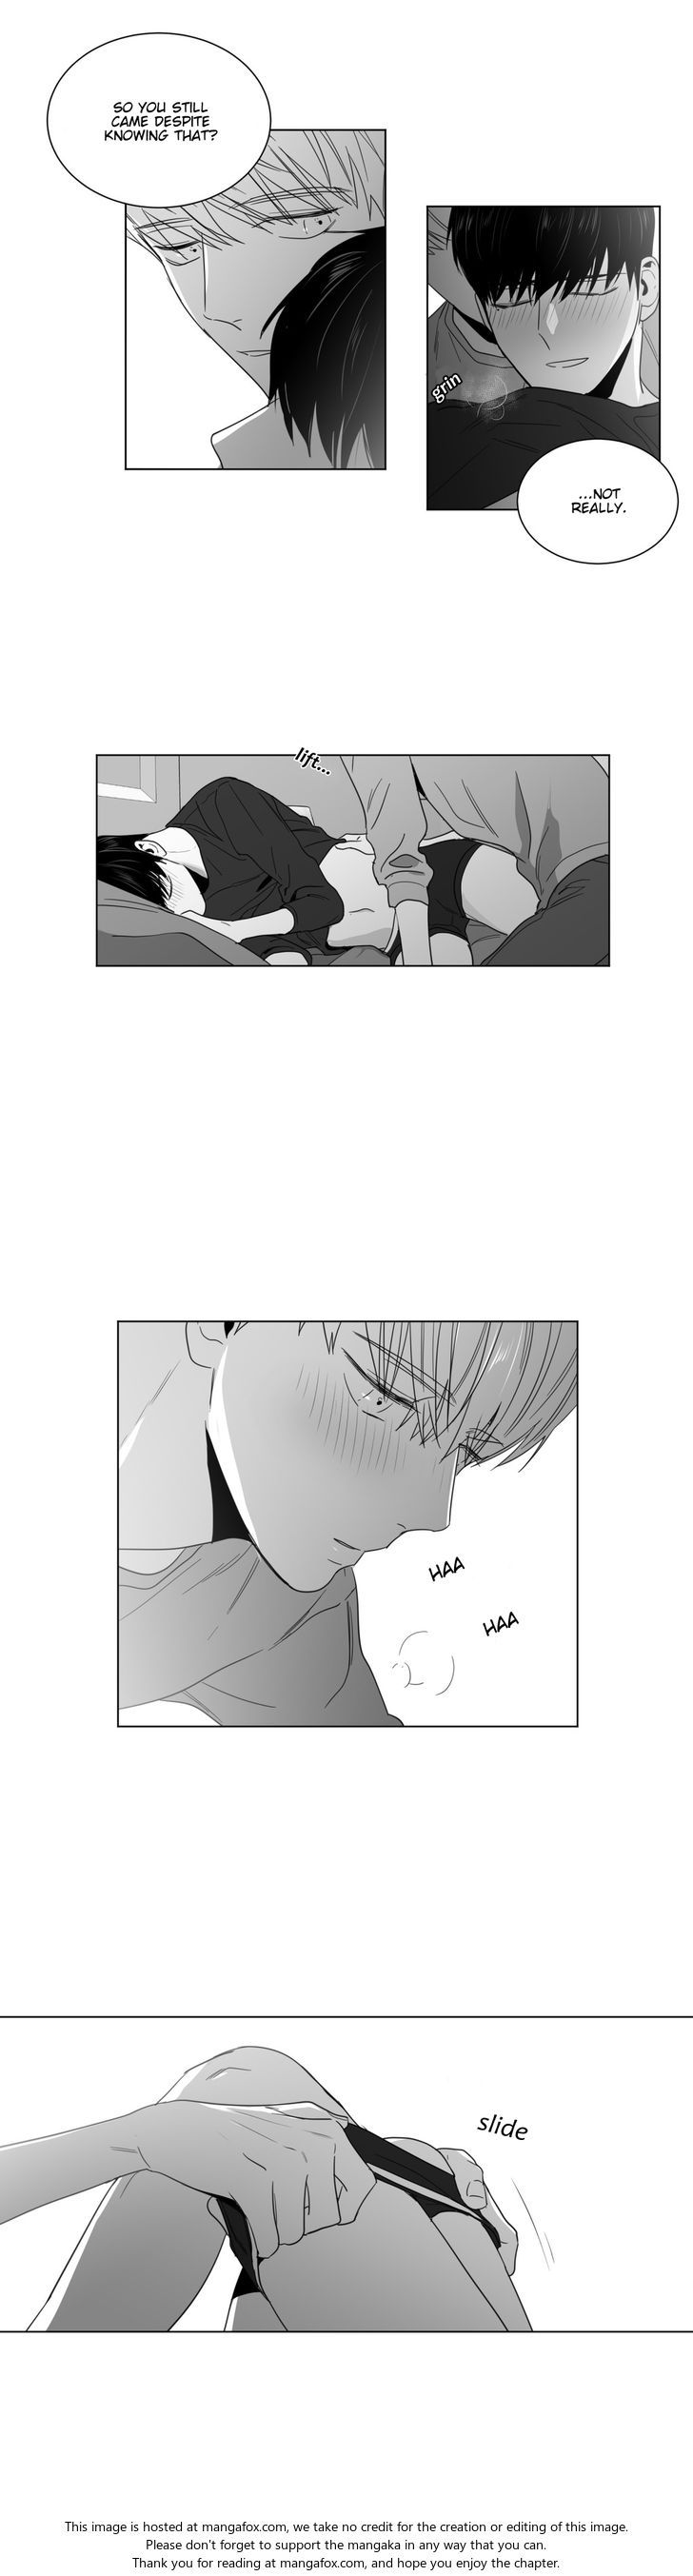 Lover Boy (Lezhin) Chapter 019 page 8